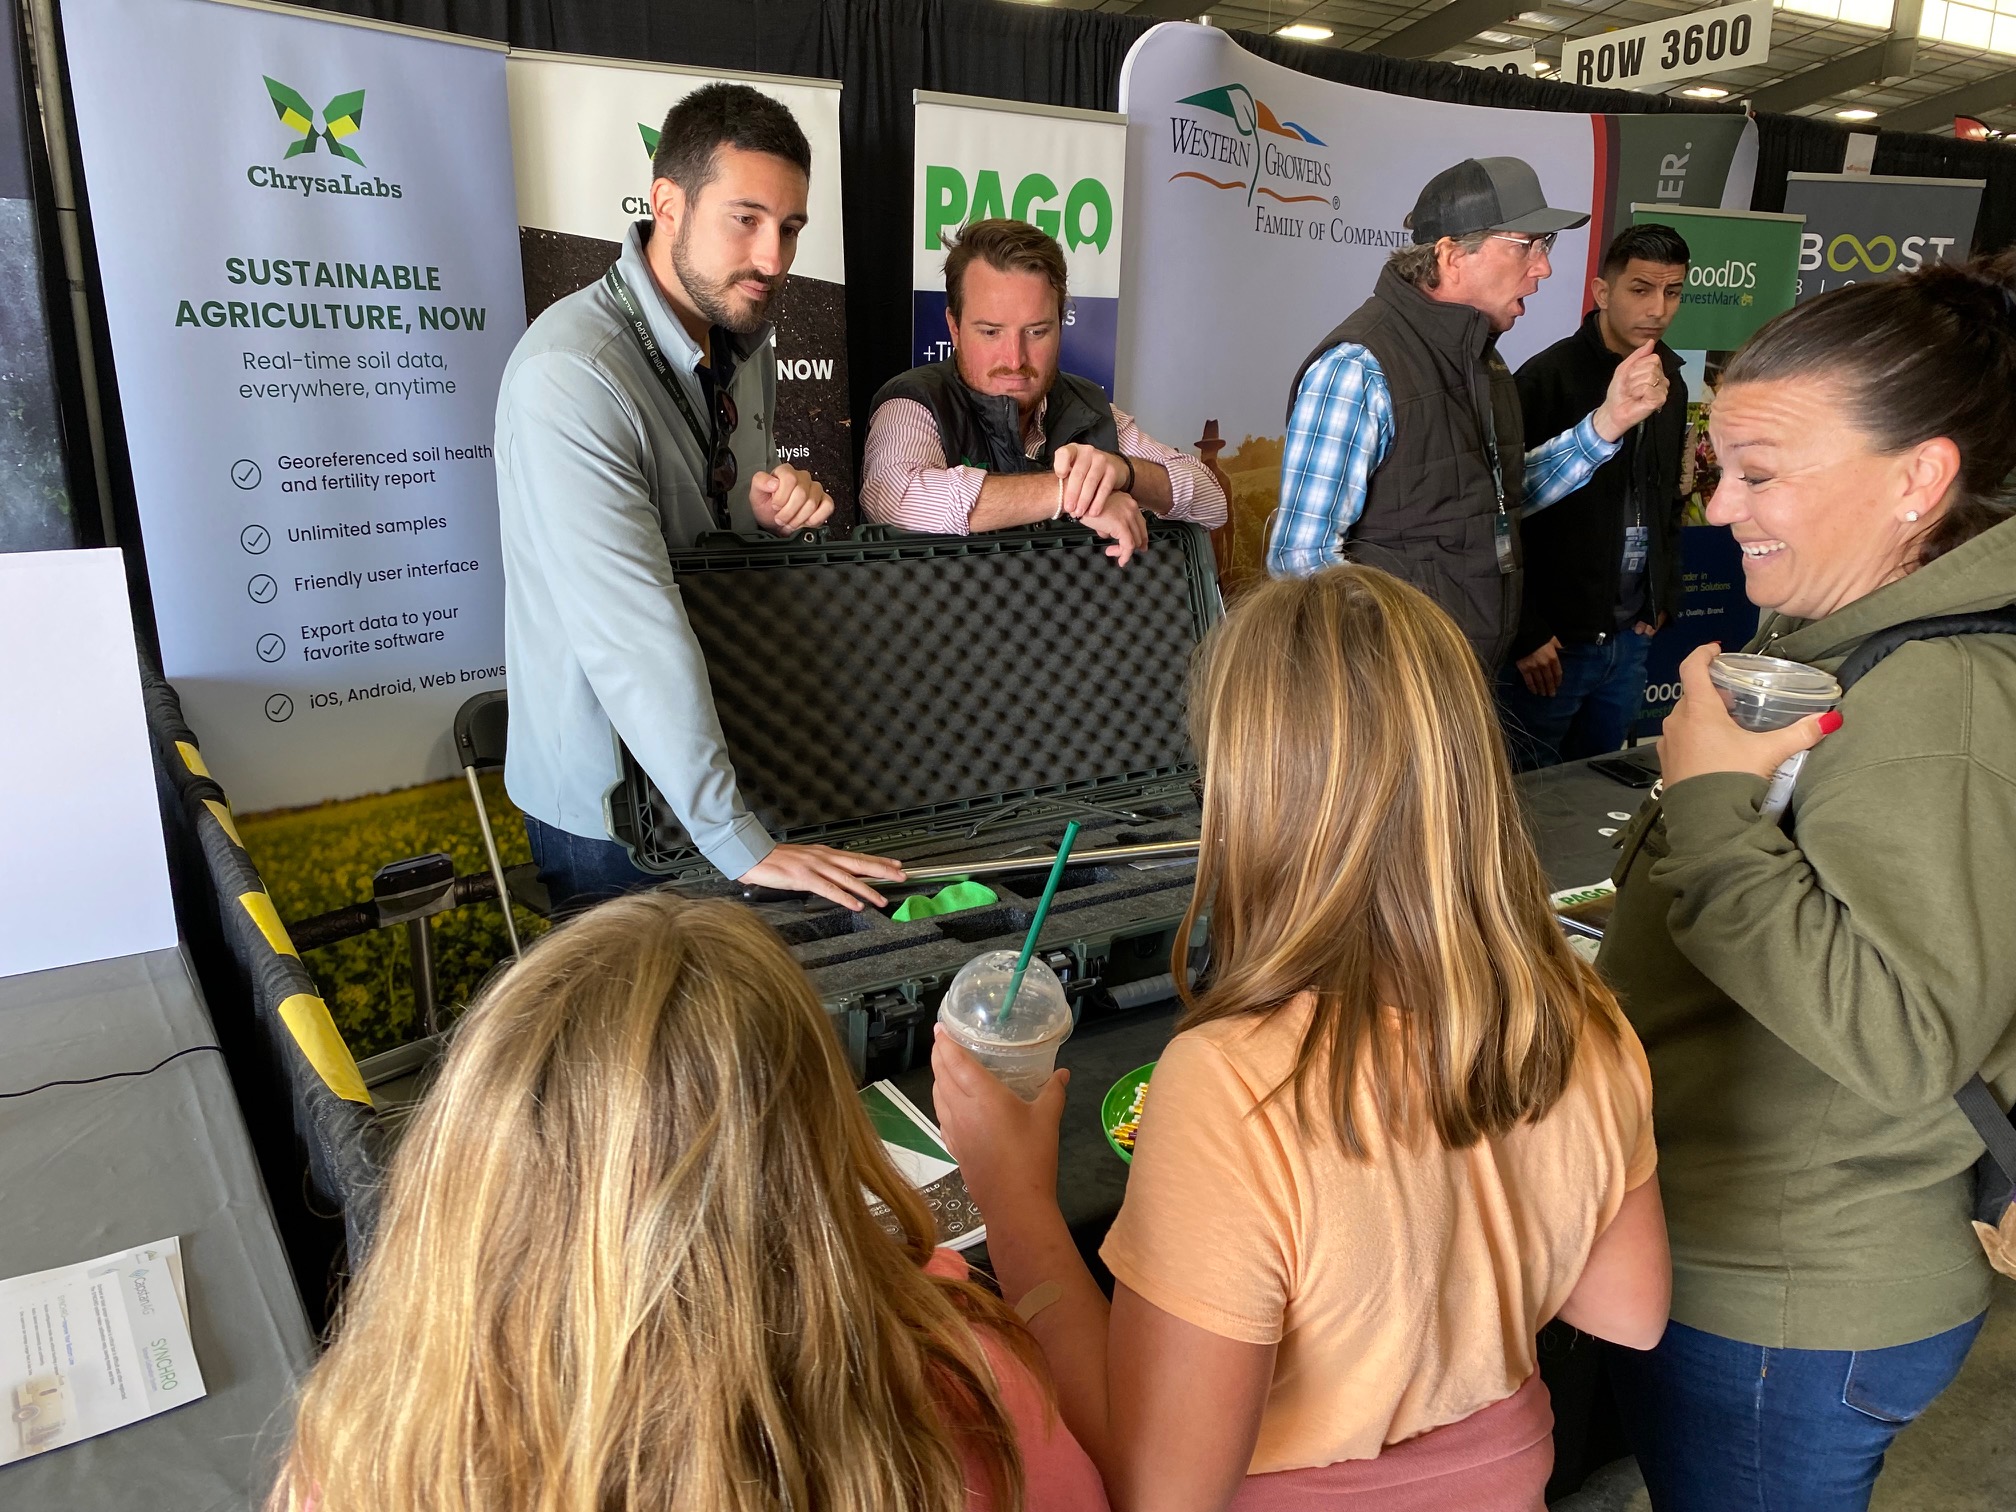  At the ChrysaLabs booth, team members explain the company’s technology to a family. ChrysaLabs provides georeferenced soil health and fertility data for growers. 